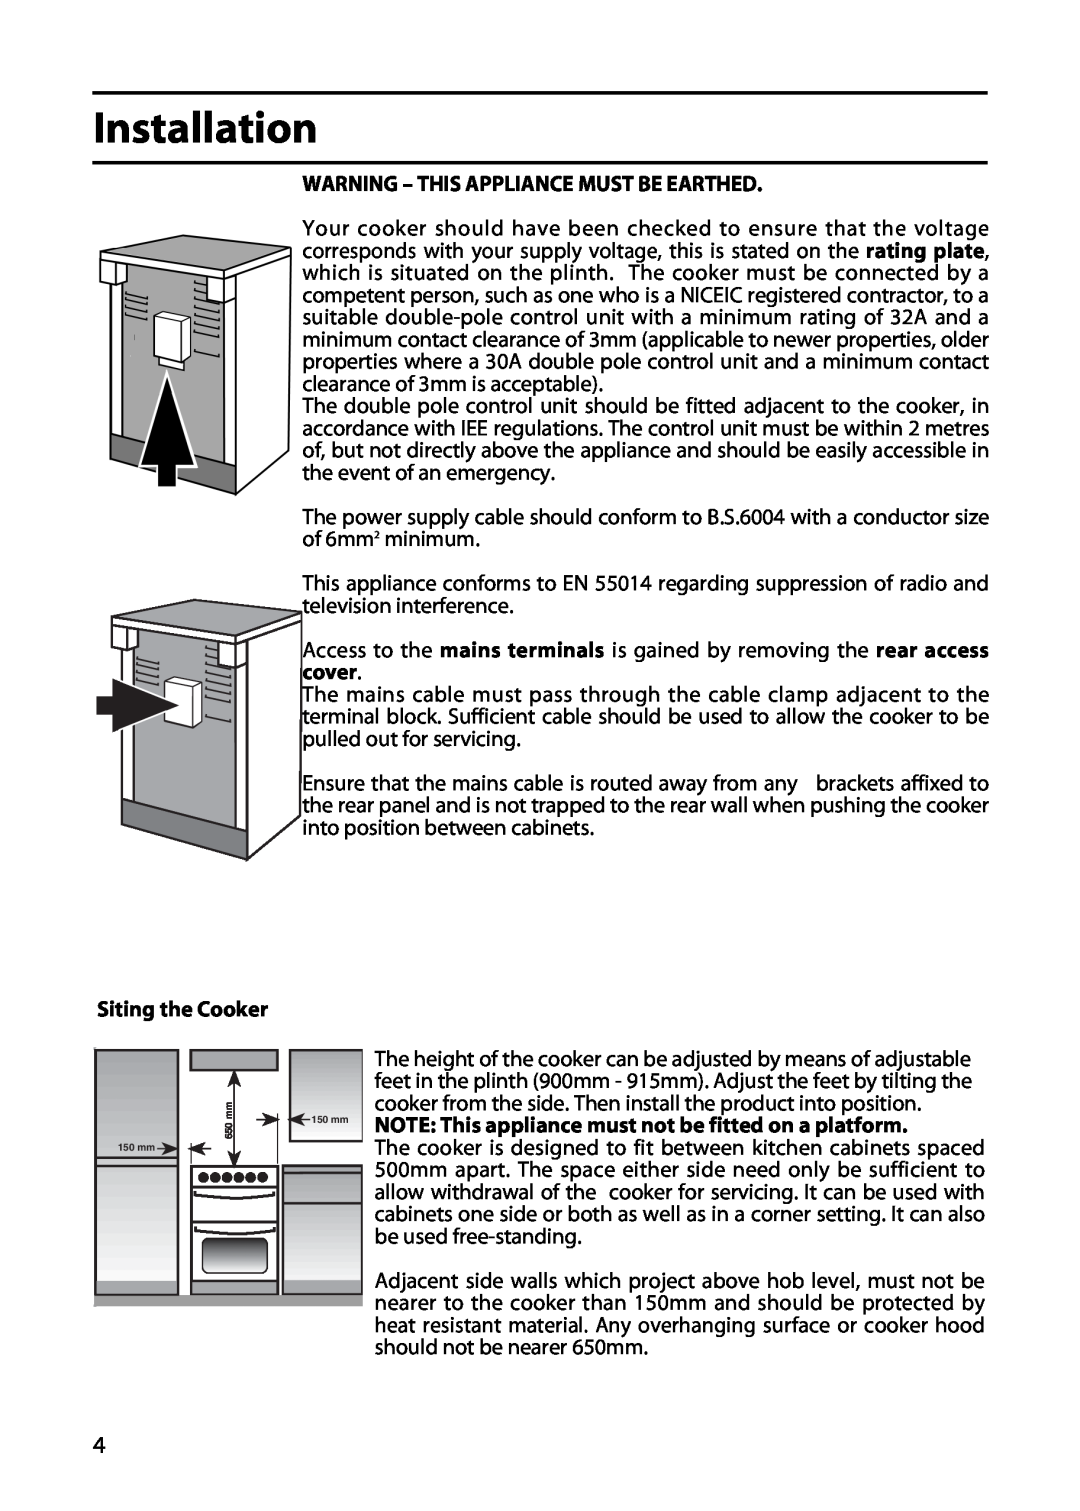 Cannon 20718, 195049764.00, 20715 manual Installation, Warning - This Appliance Must Be Earthed, Siting the Cooker 